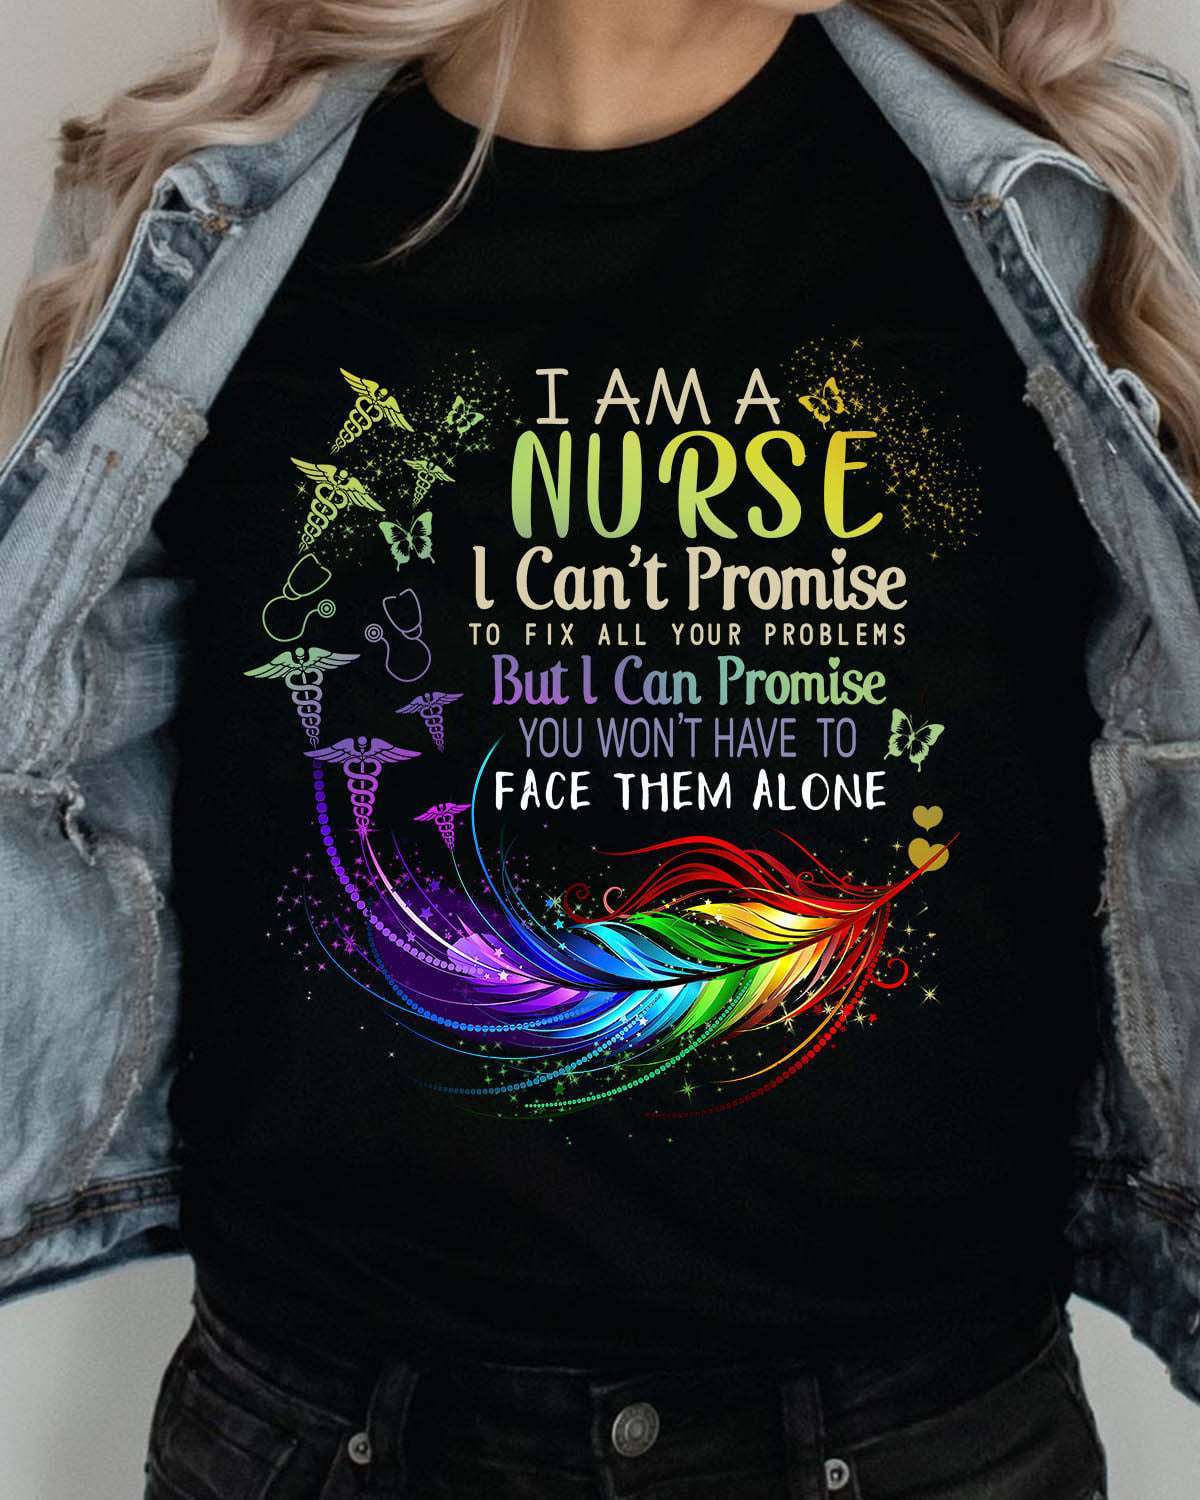 Nurse the job - I am a nurse i can't promise to fix all your problems but i can promise you won't have to face them alone